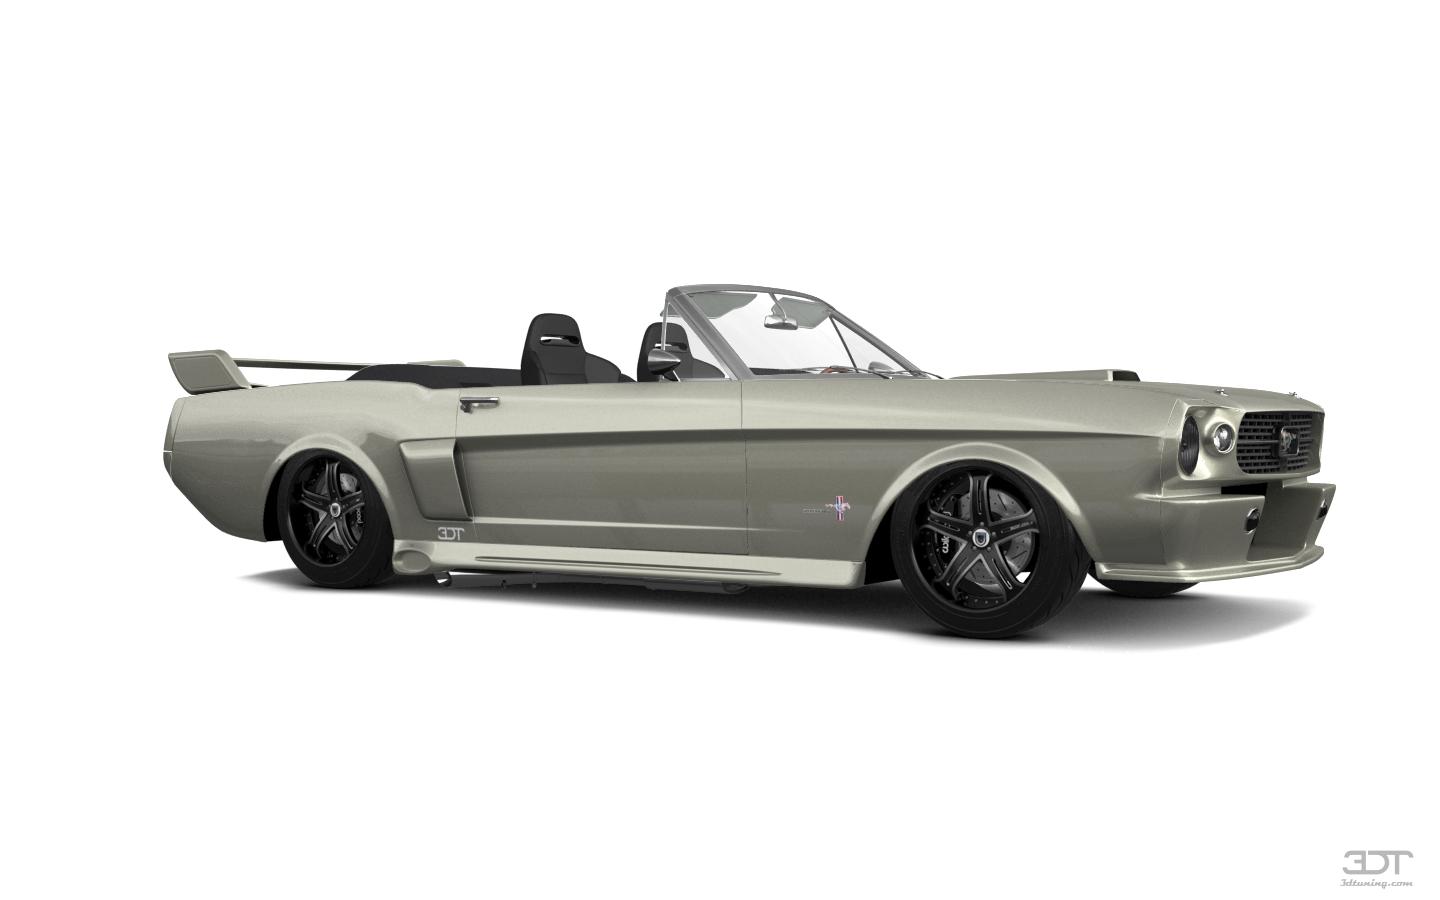 Ford Mustang Convertible 1964